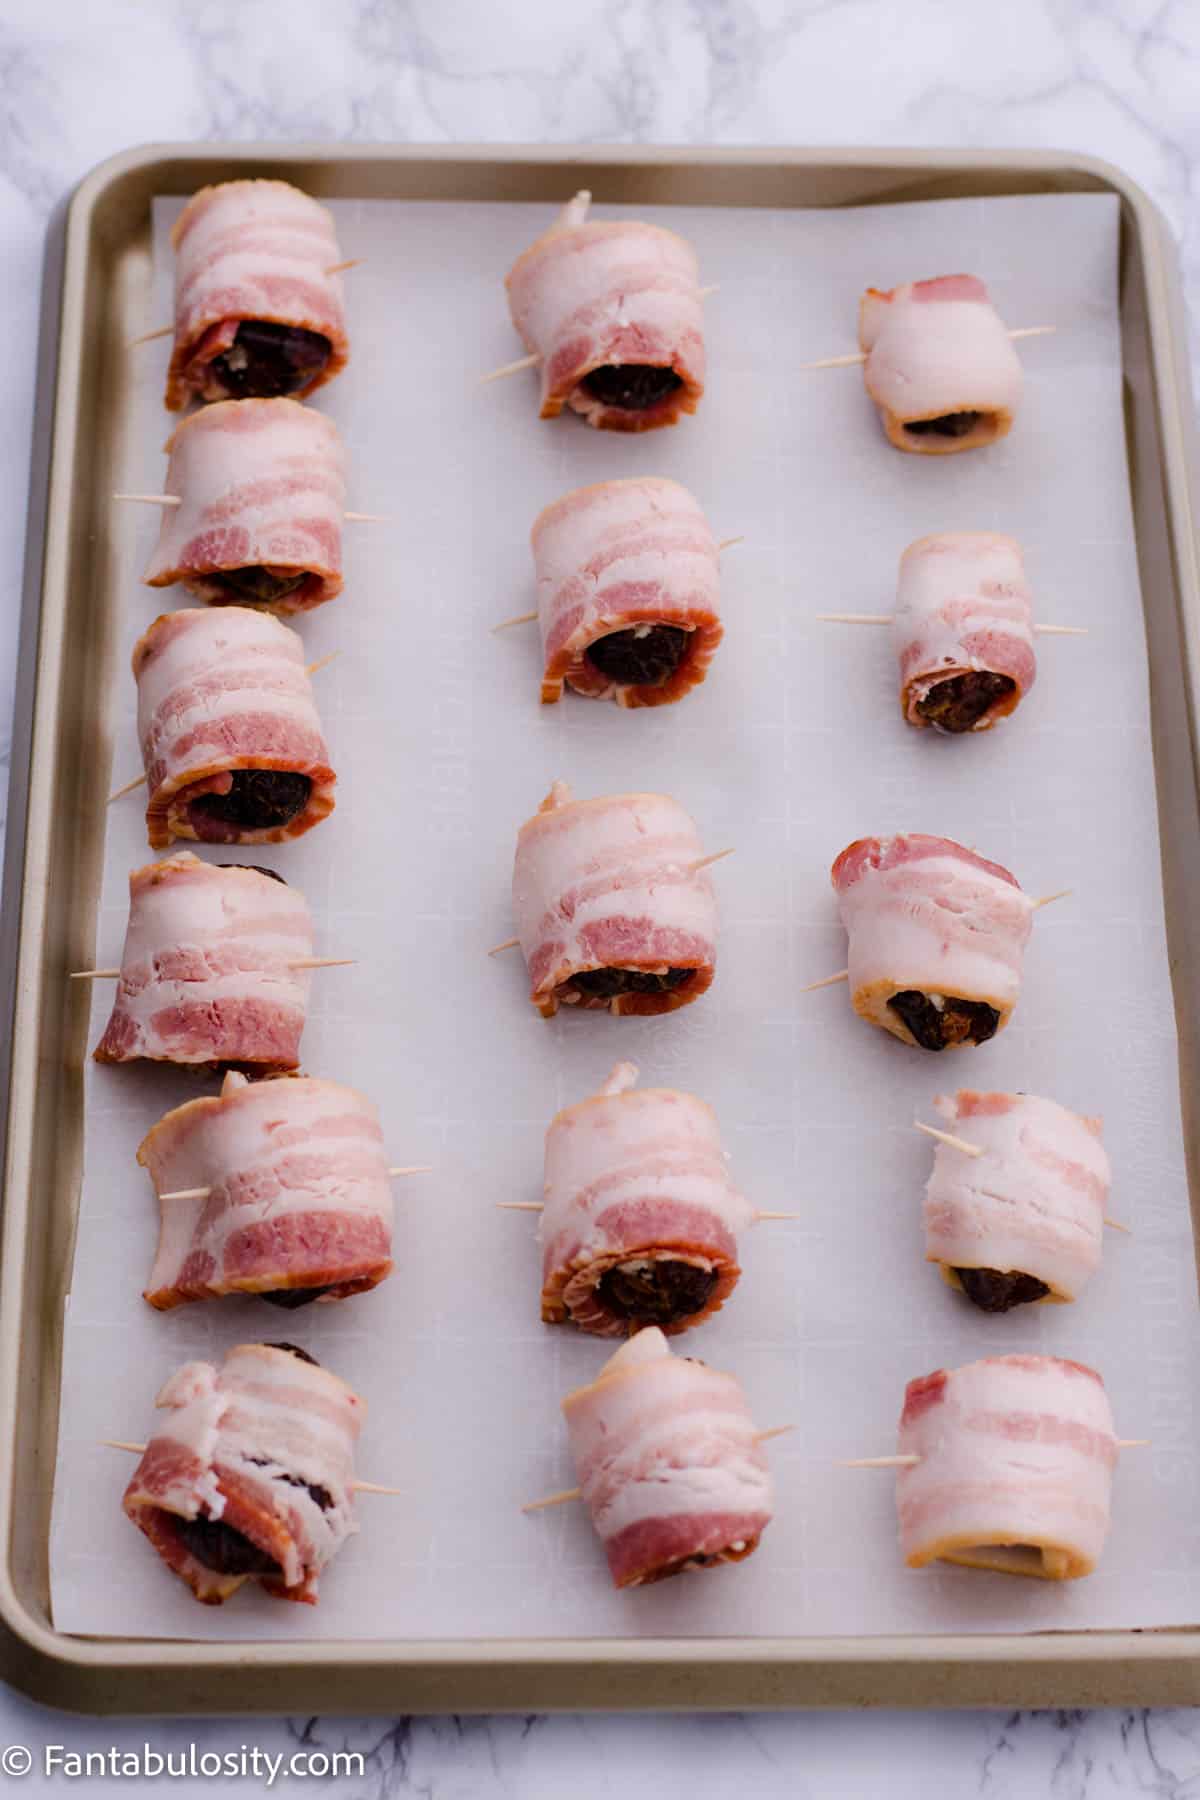 Place wrapped dates on parchment lined baking sheet.